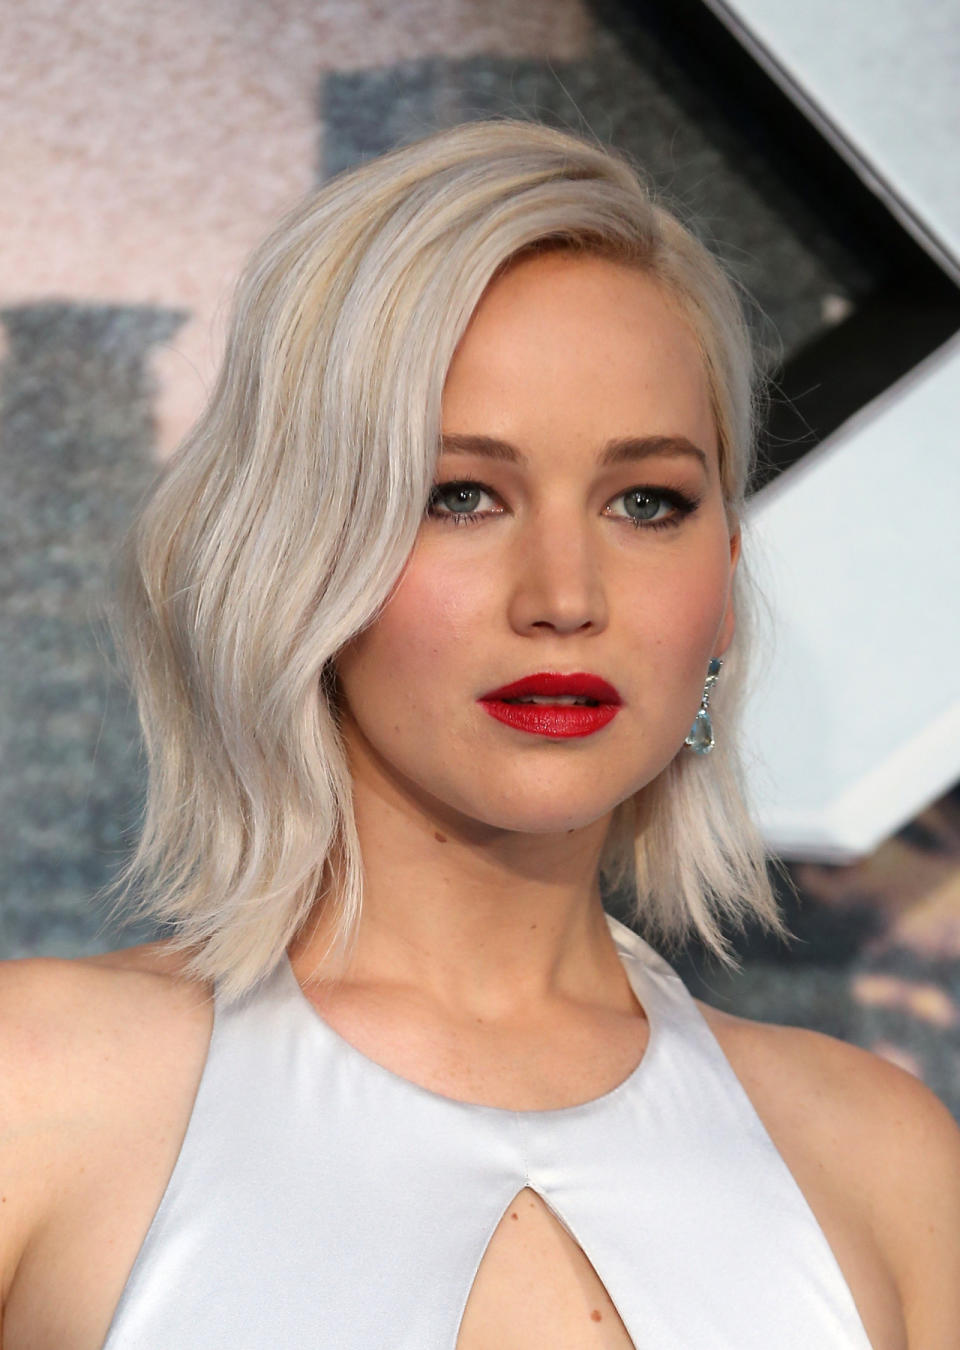 Jennifer Lawrence changed her hair color to an even more icy-blonde blonde in 2016. The Kentucky girl is gone replaced with an international superstar